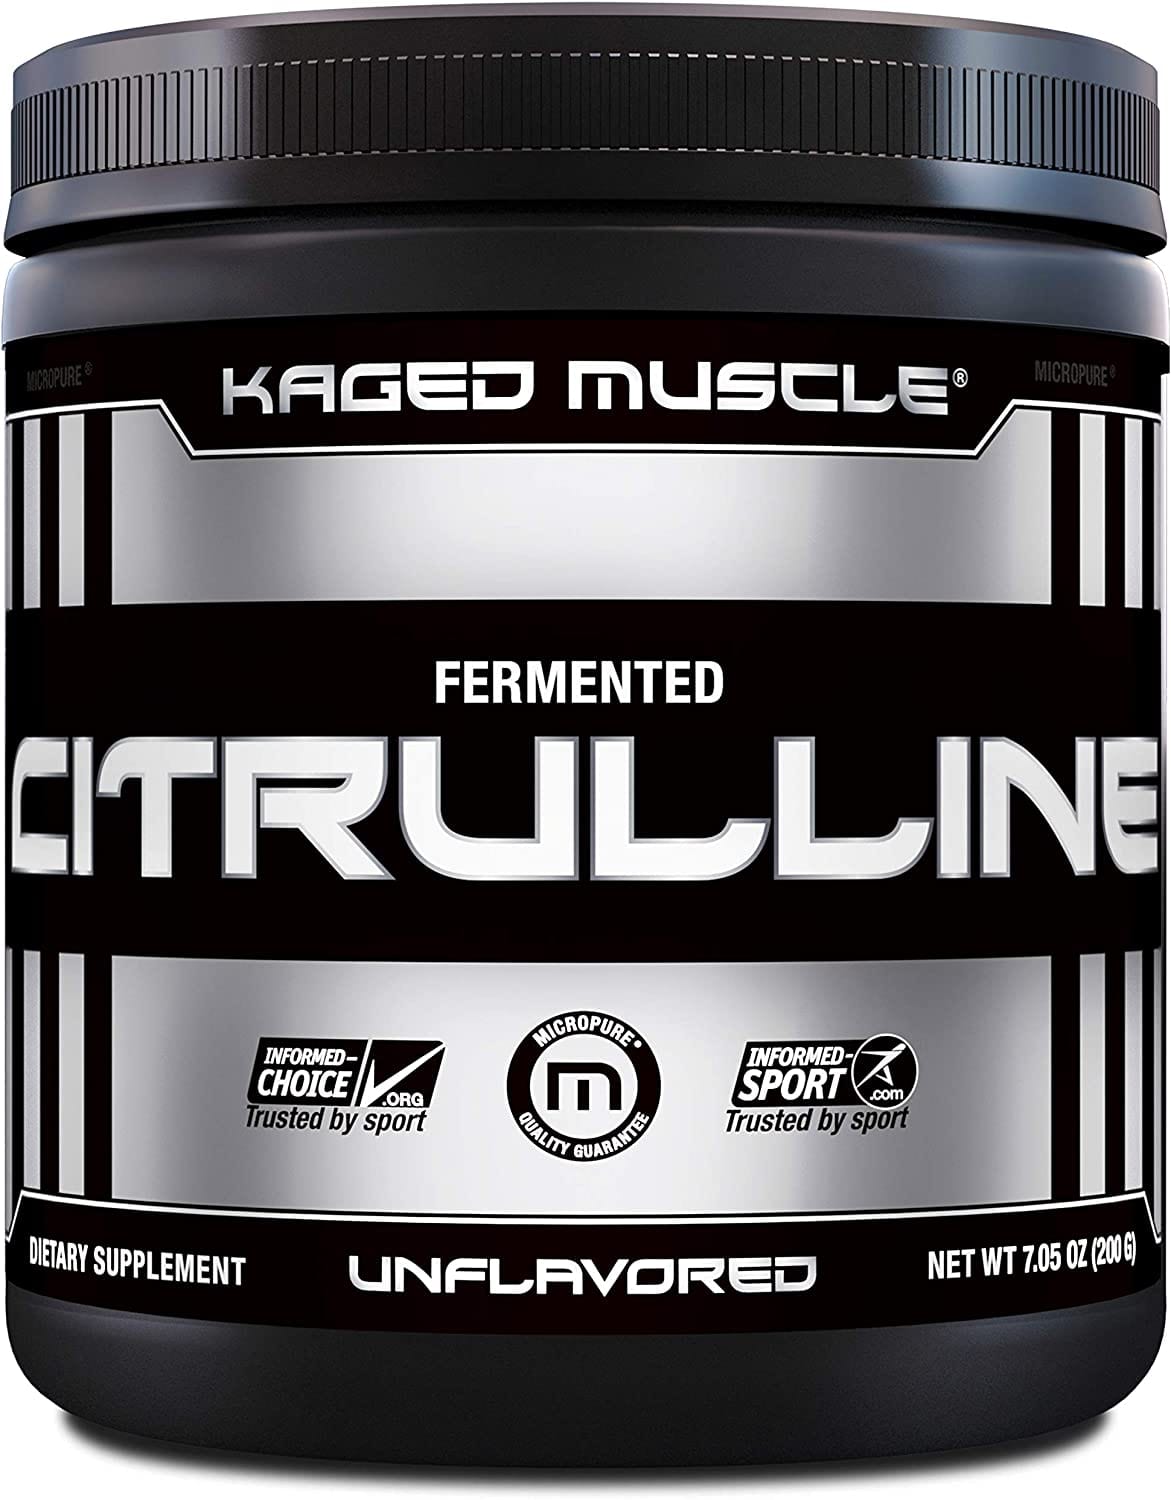 Kaged MuscleCitrullineCitrullineRED SUPPS